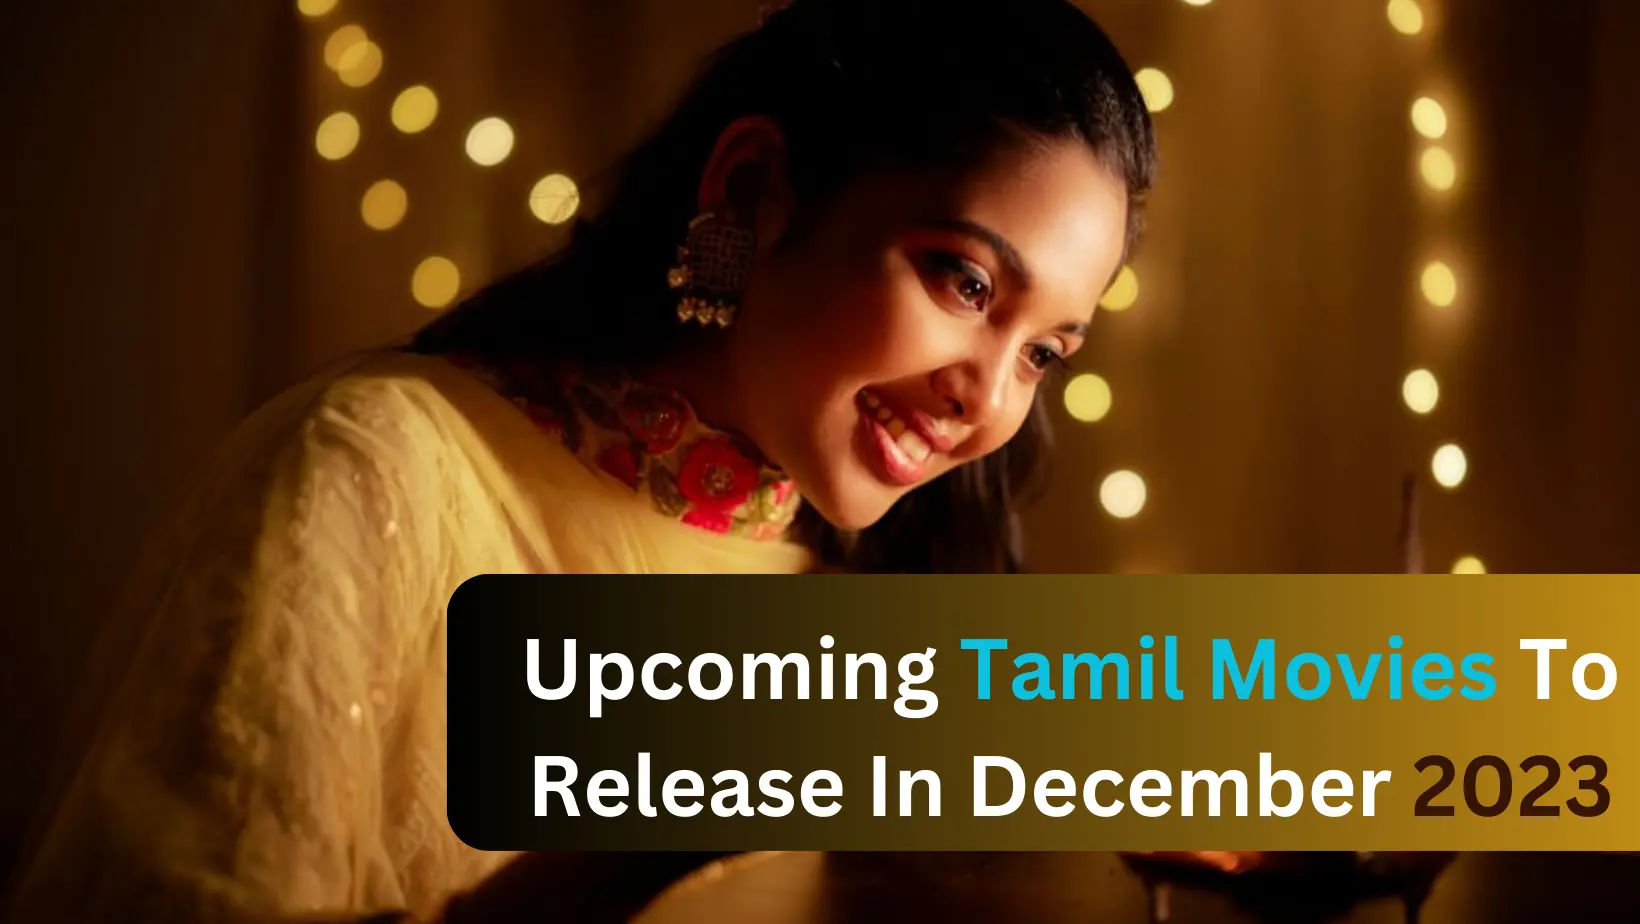 Upcoming Tamil Movies To Release In December 2023